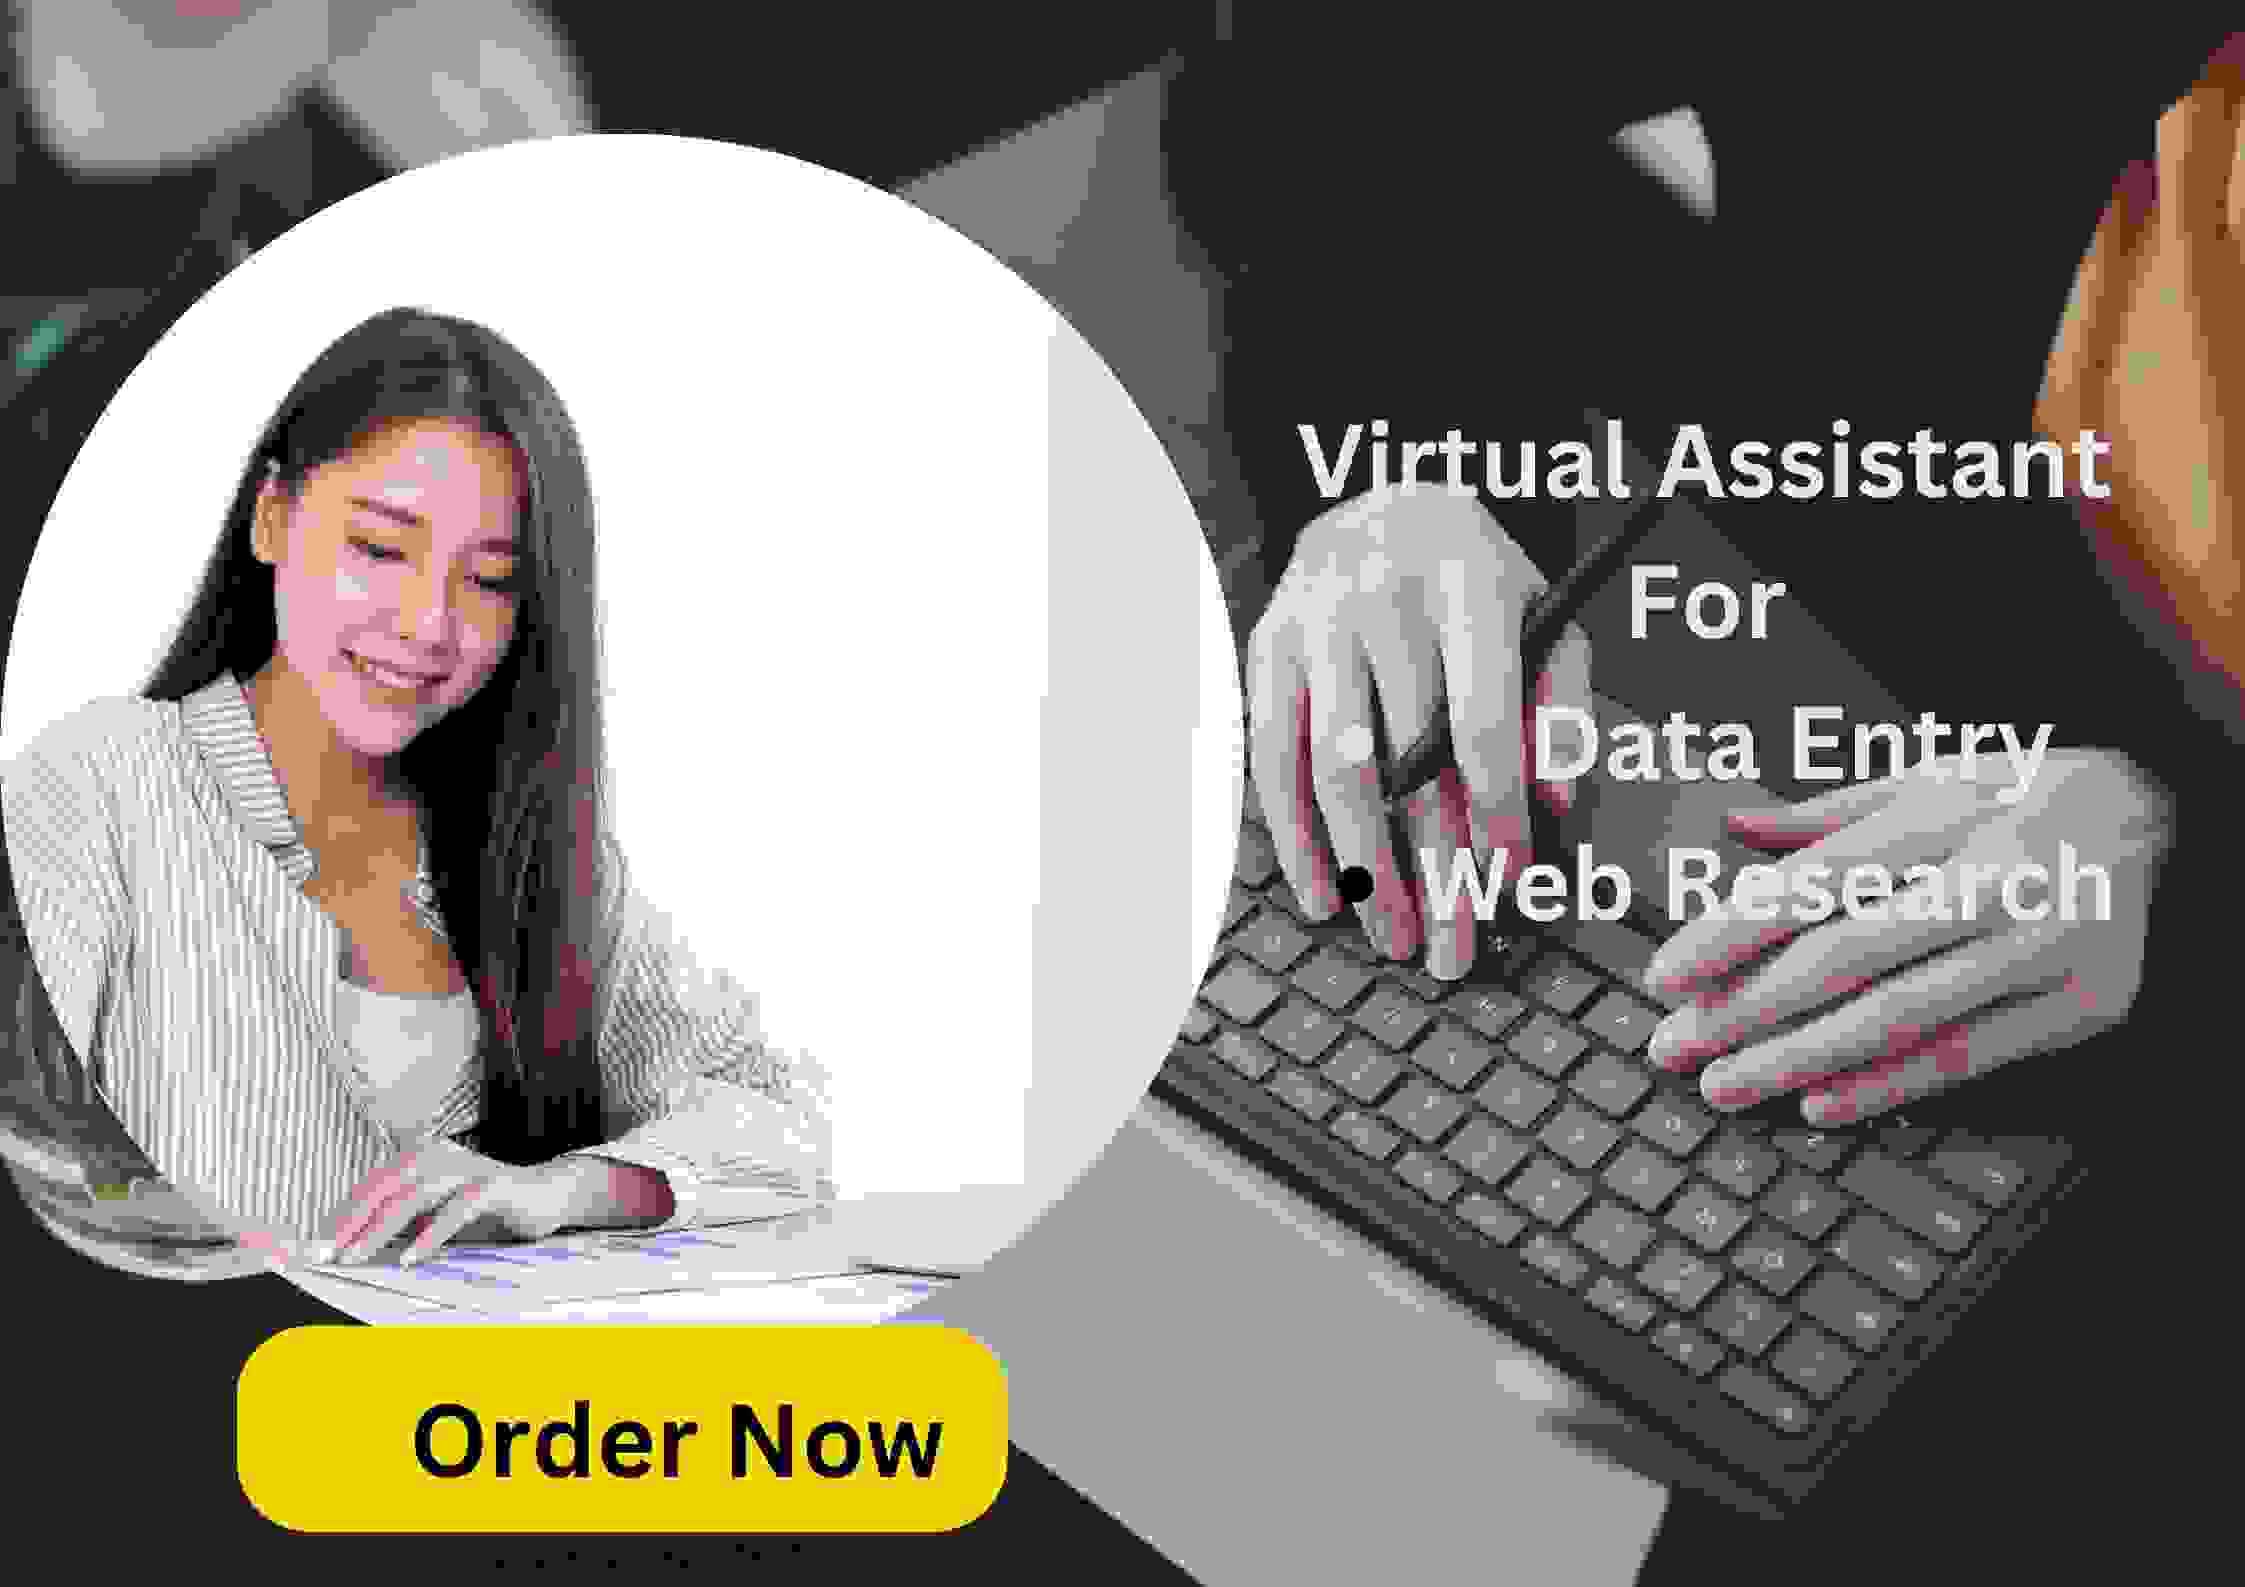 I will be your virtual assistant for typing, Pdf conversion into word